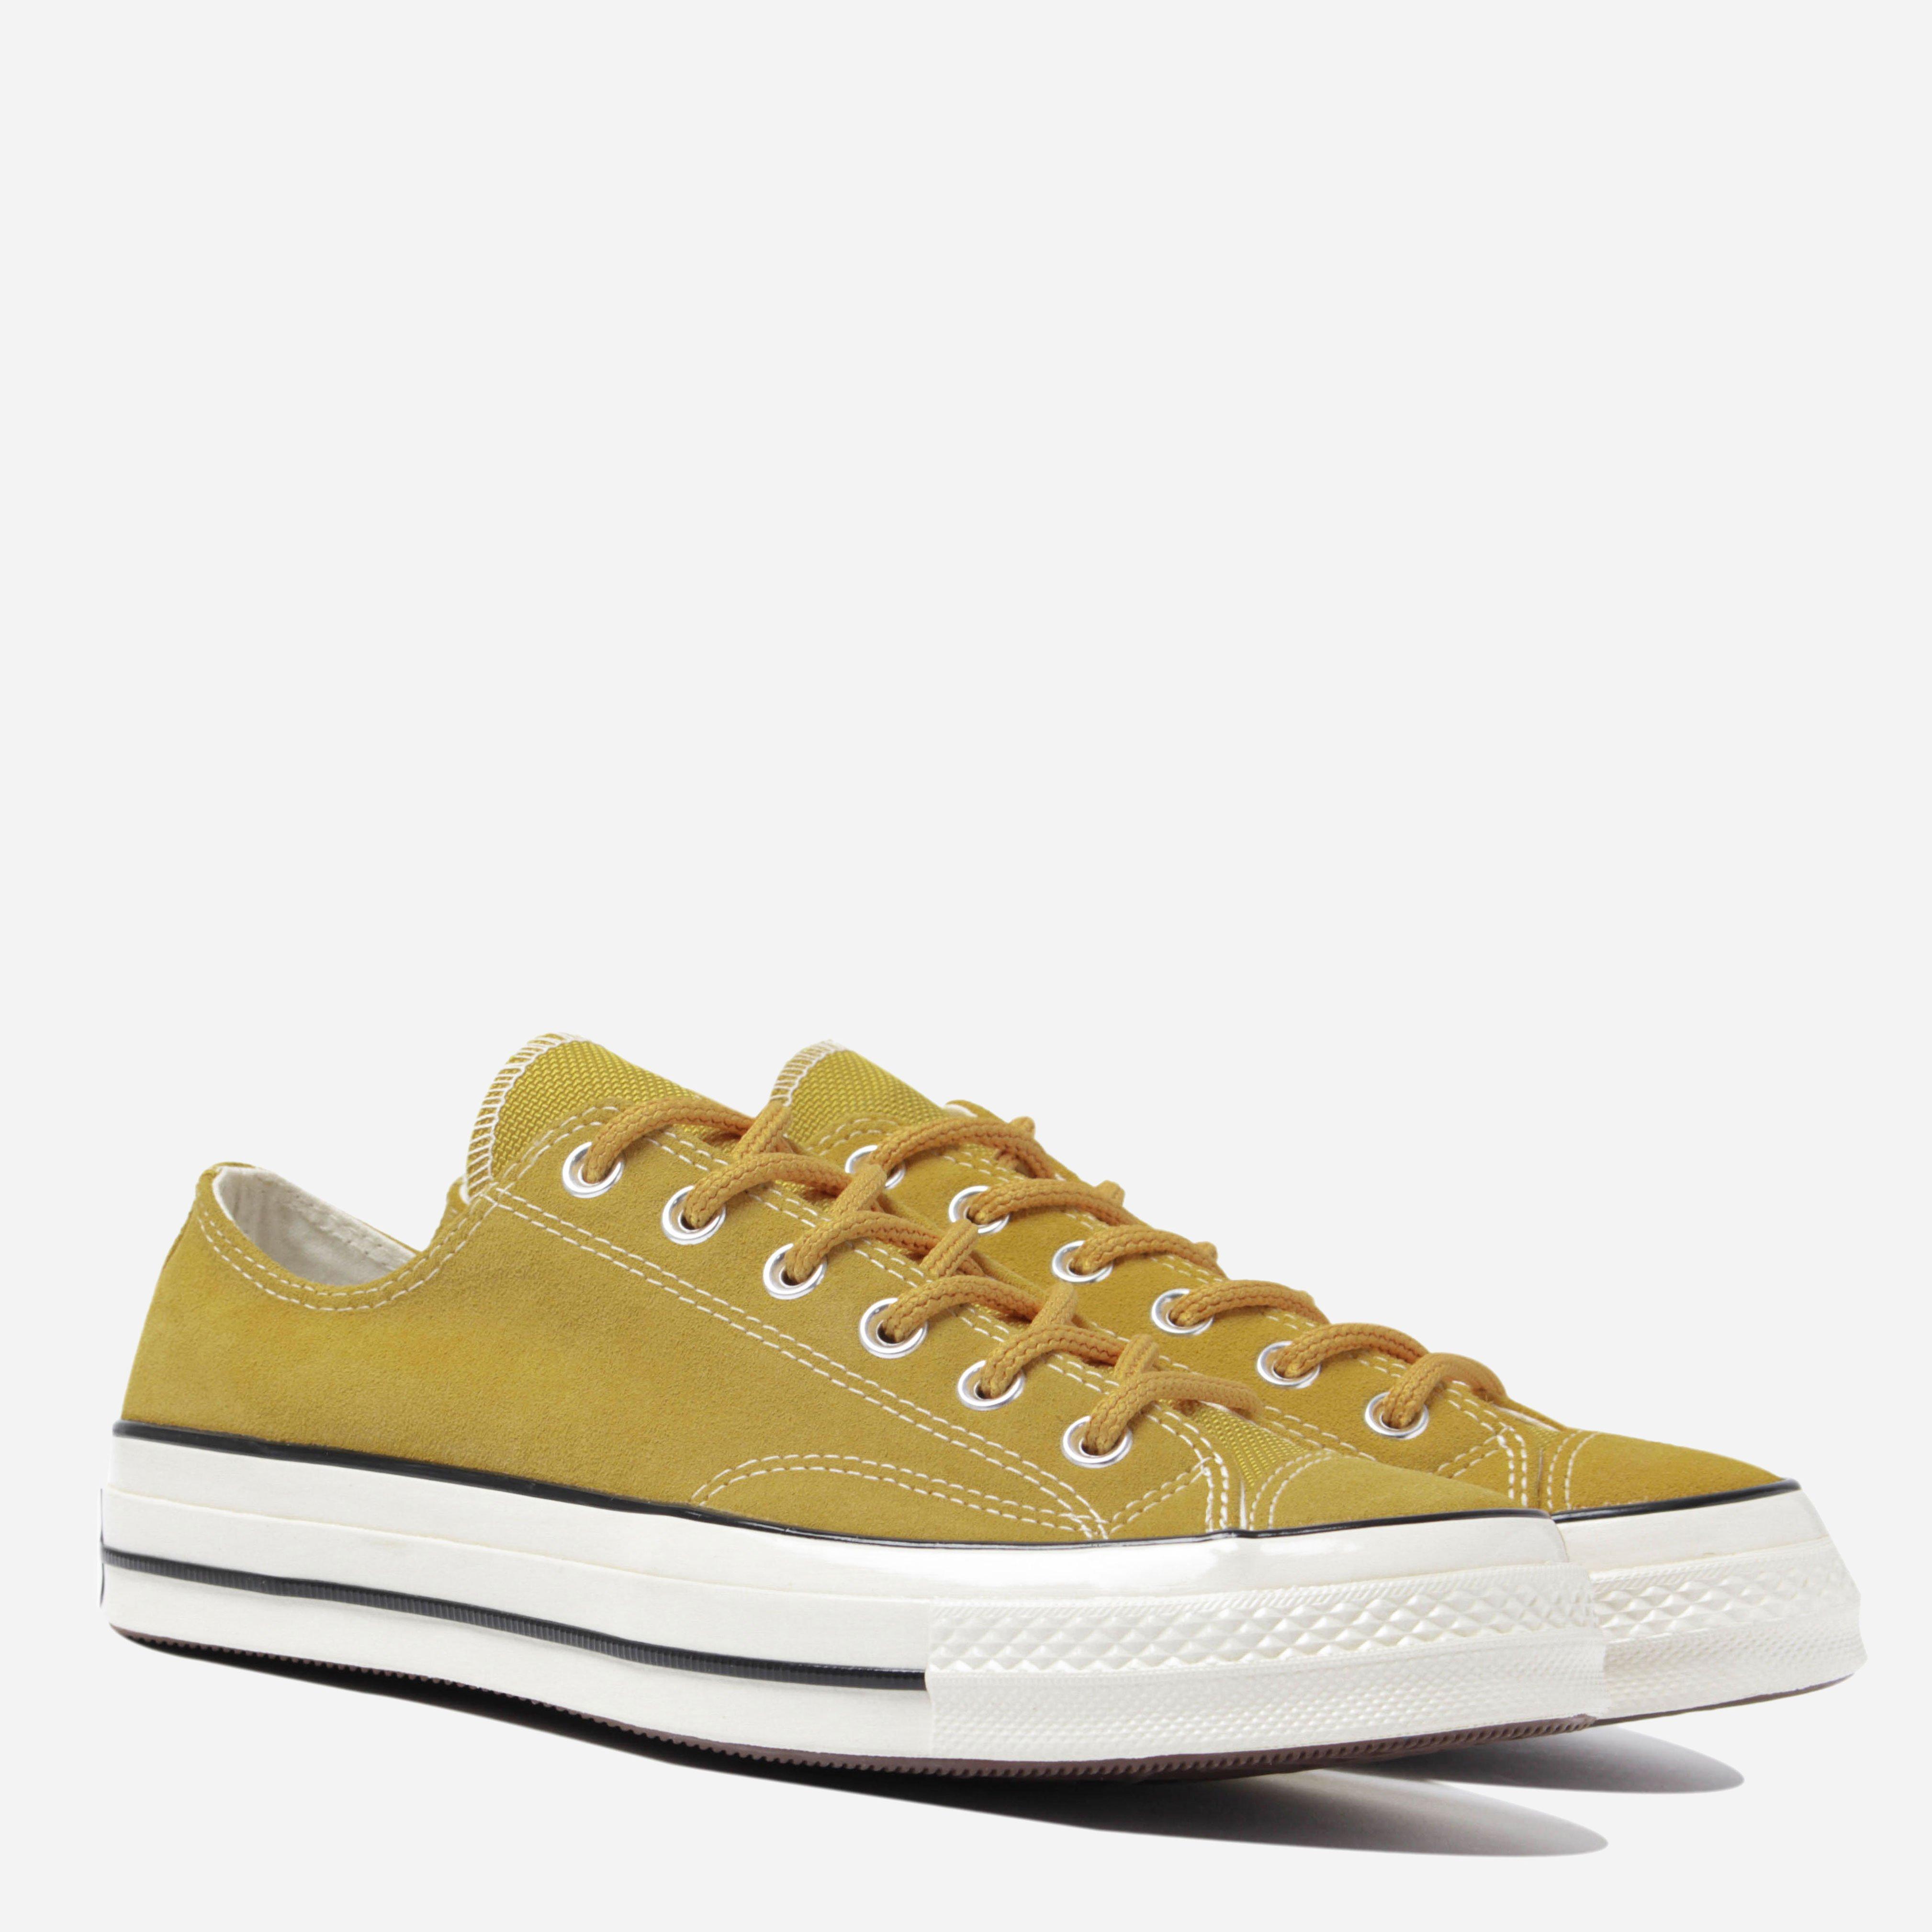 Lyst - Converse Chuck Taylor All Star 70 Ox Suede in Yellow for Men